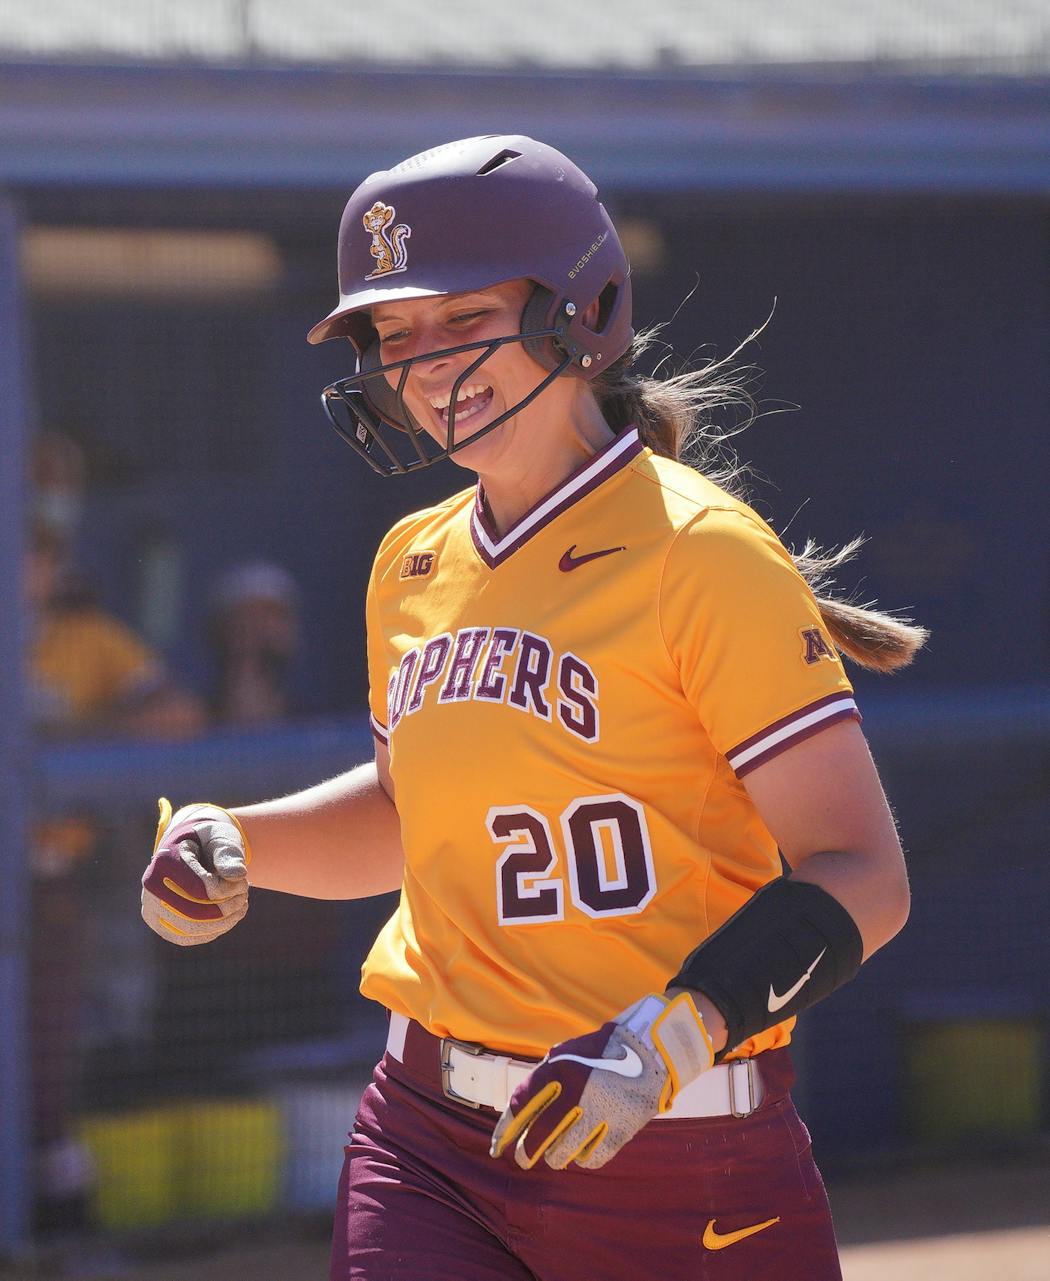 Megan Dray’s second home run of the season gave the Gophers softball team a short-lived lead against UCLA, which went on to win its NCAA regional.